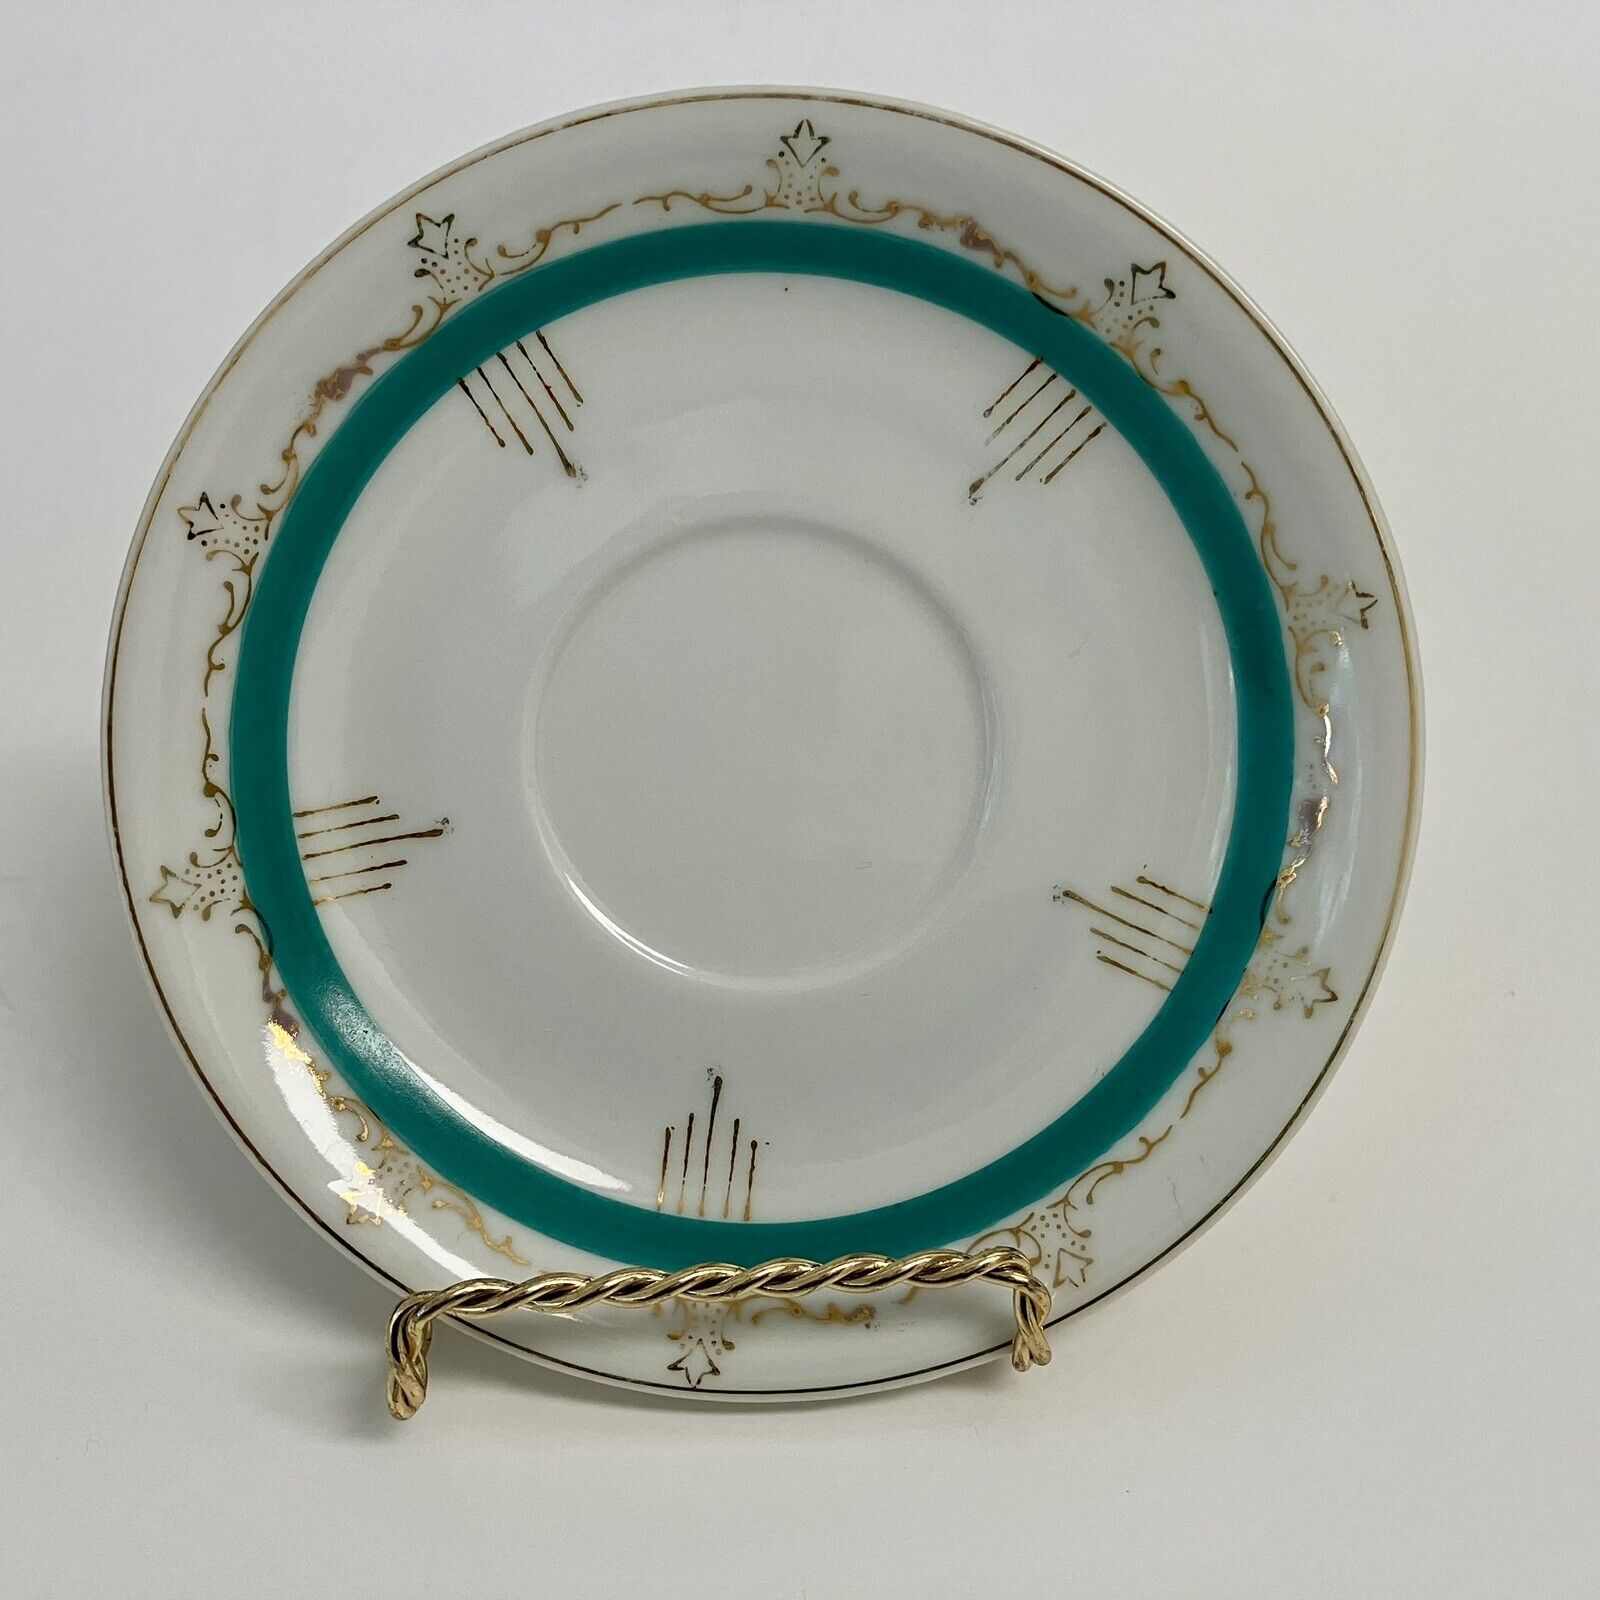 Rare Art Deco Saucer w/Gold Guilding and Turquoise Rim - Made In Japan